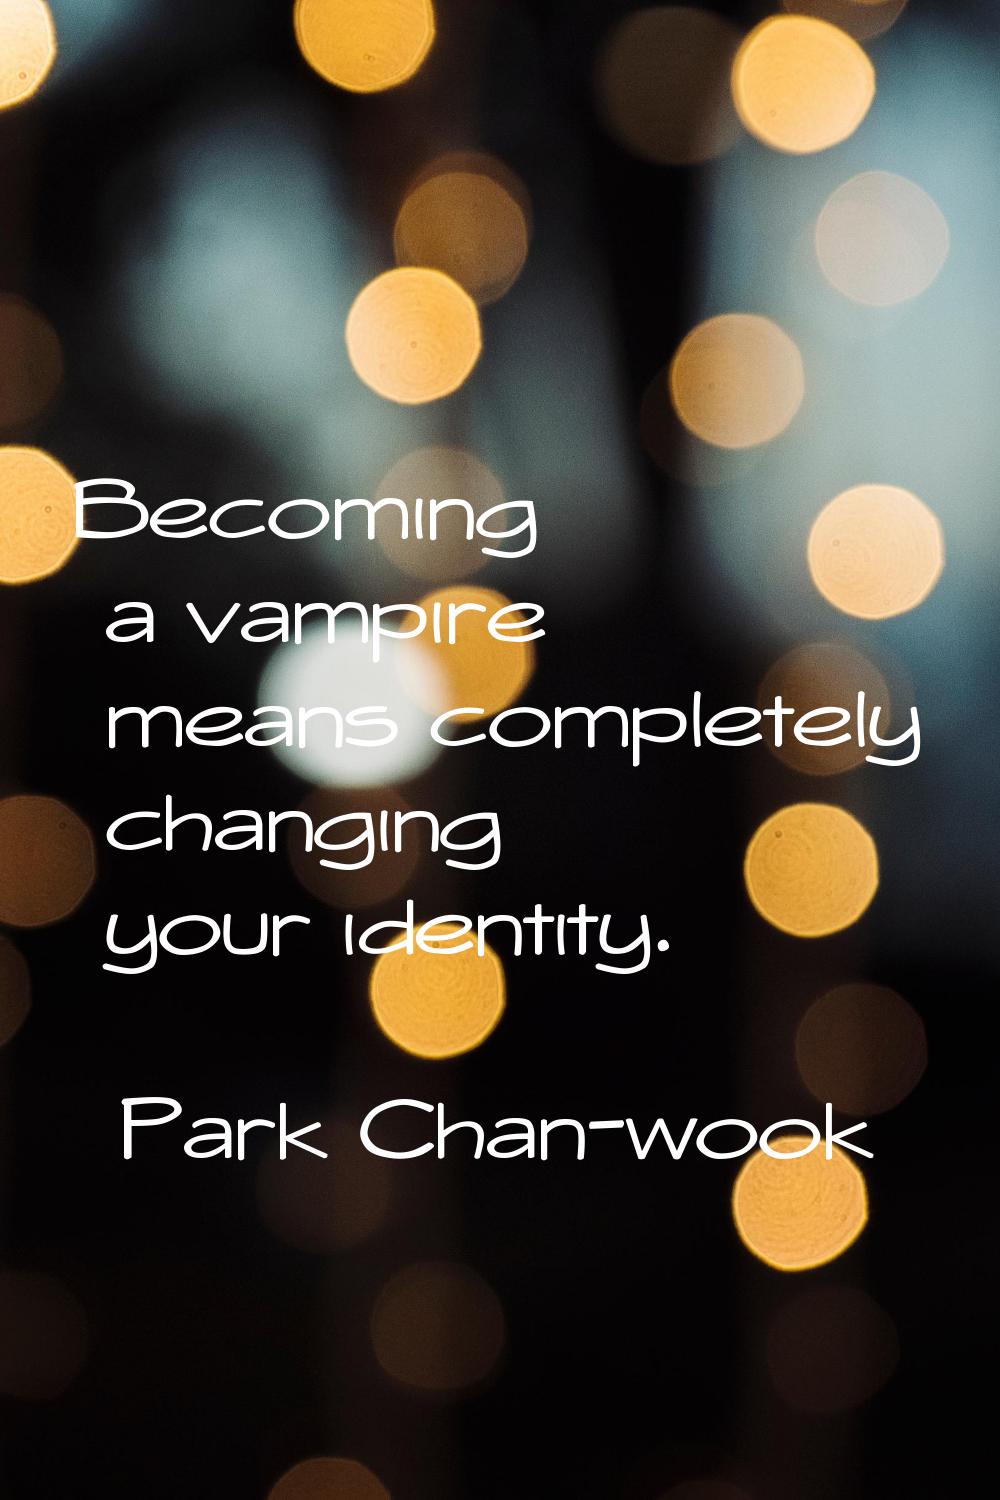 Becoming a vampire means completely changing your identity.